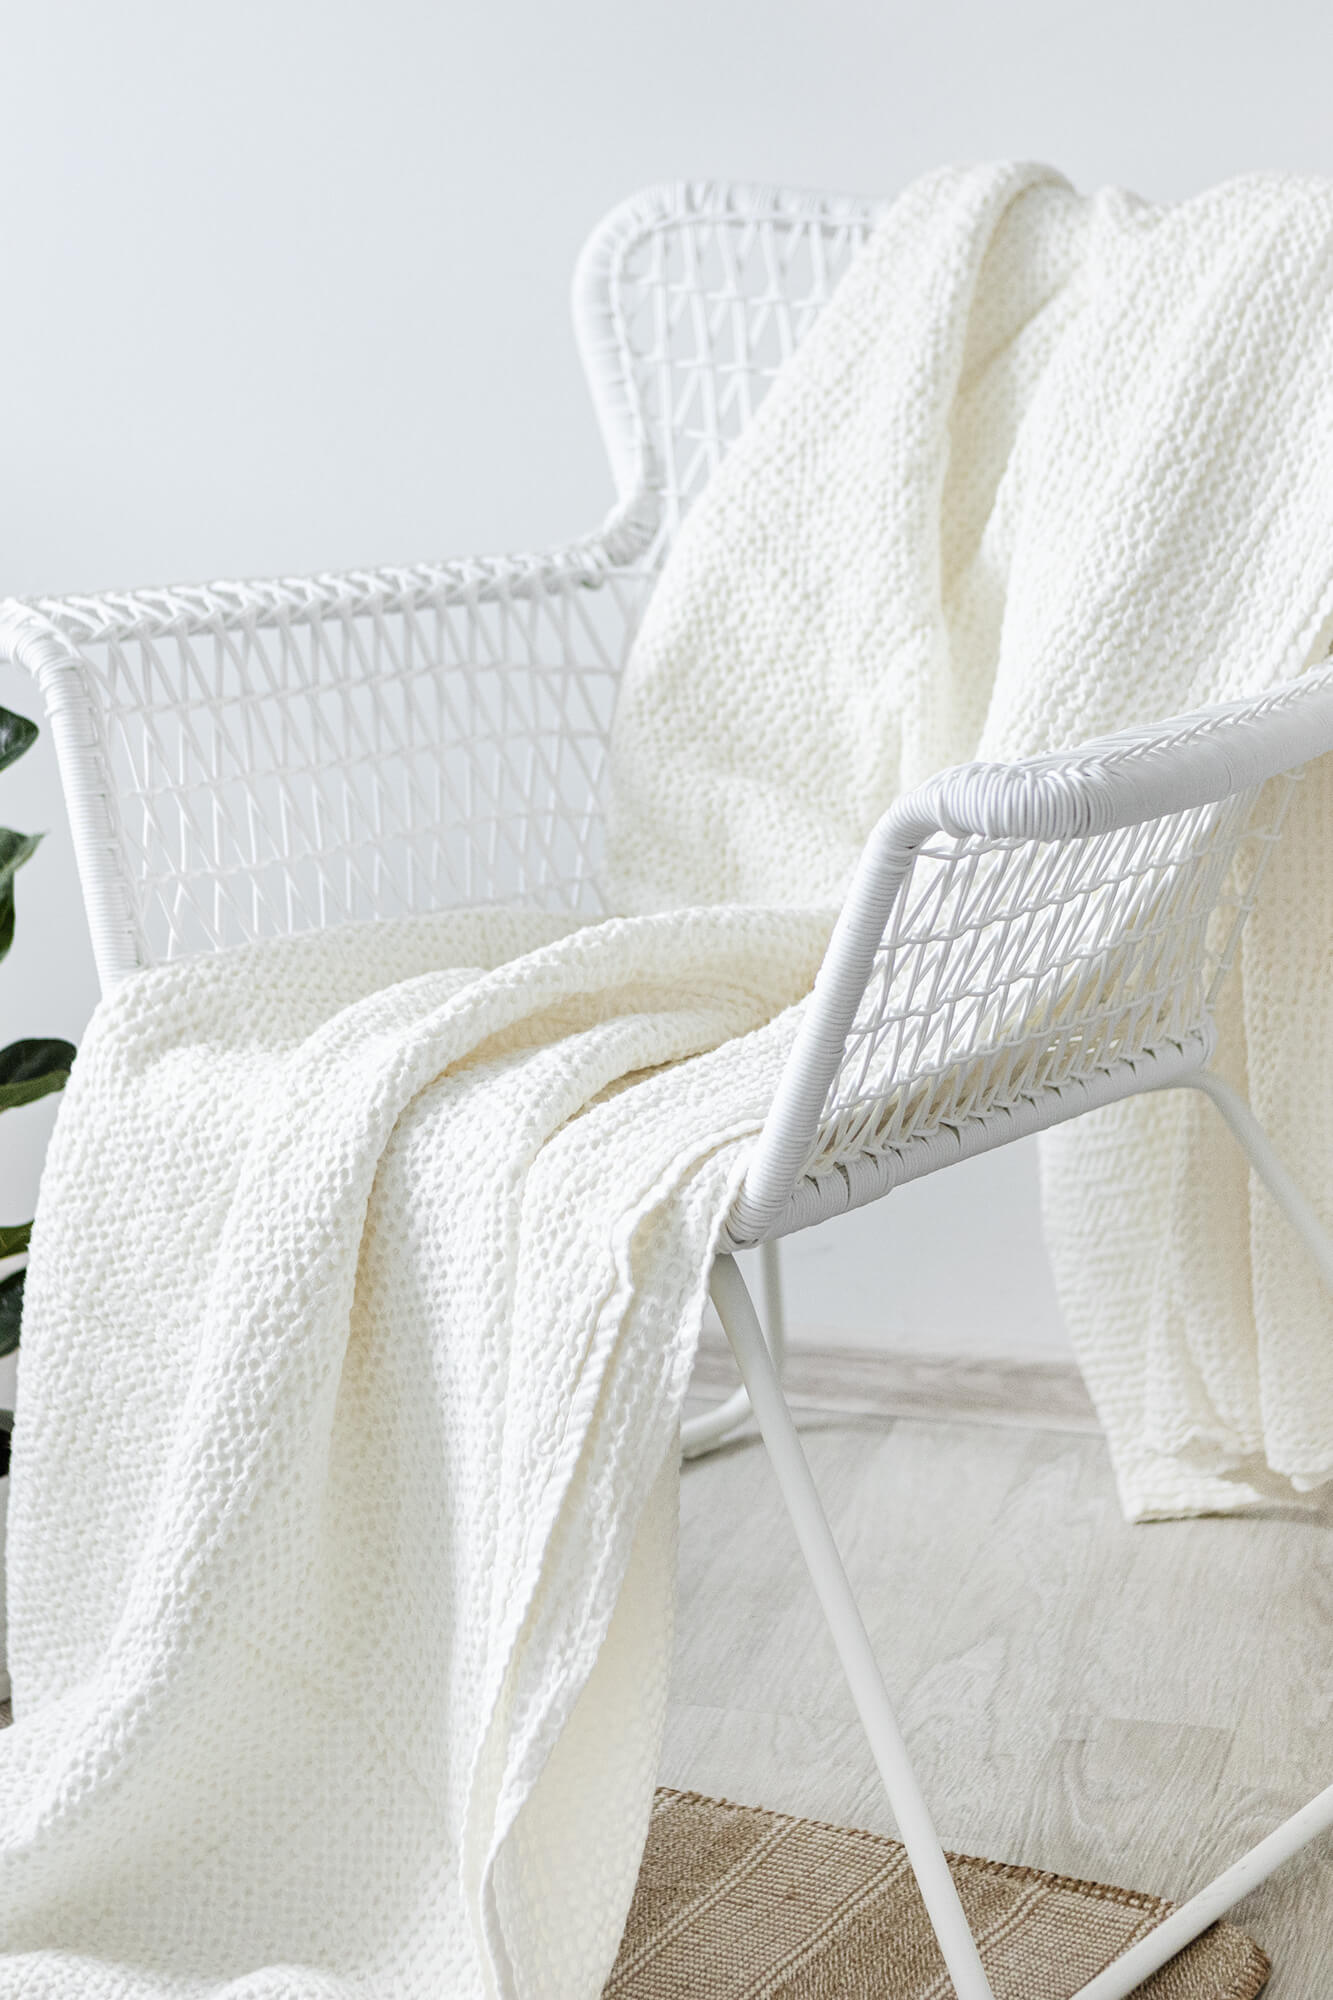 Waffle blanket throw in Milky White color